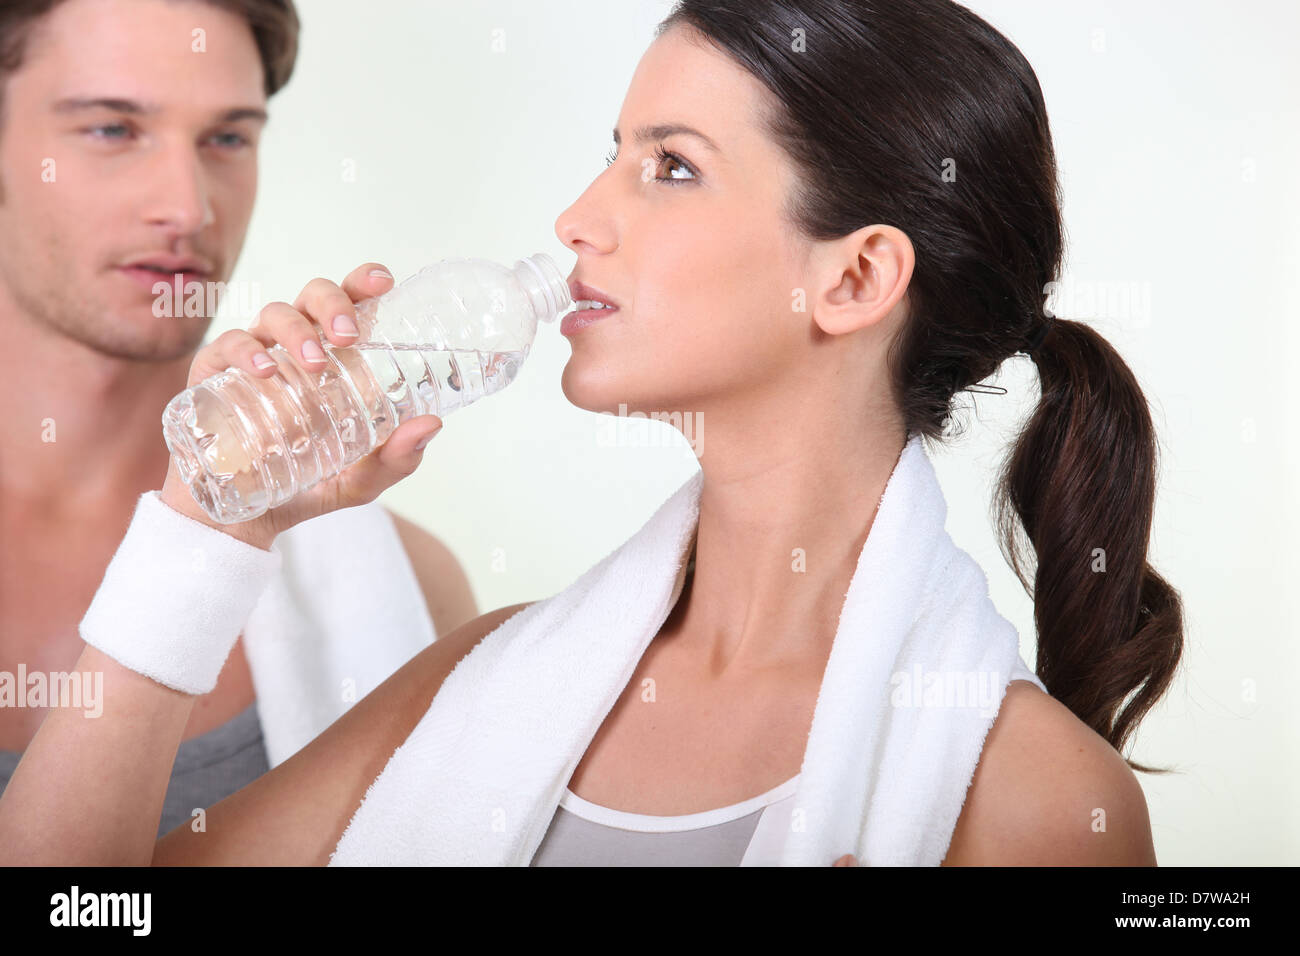 Woman drinking after a workout Stock Photo